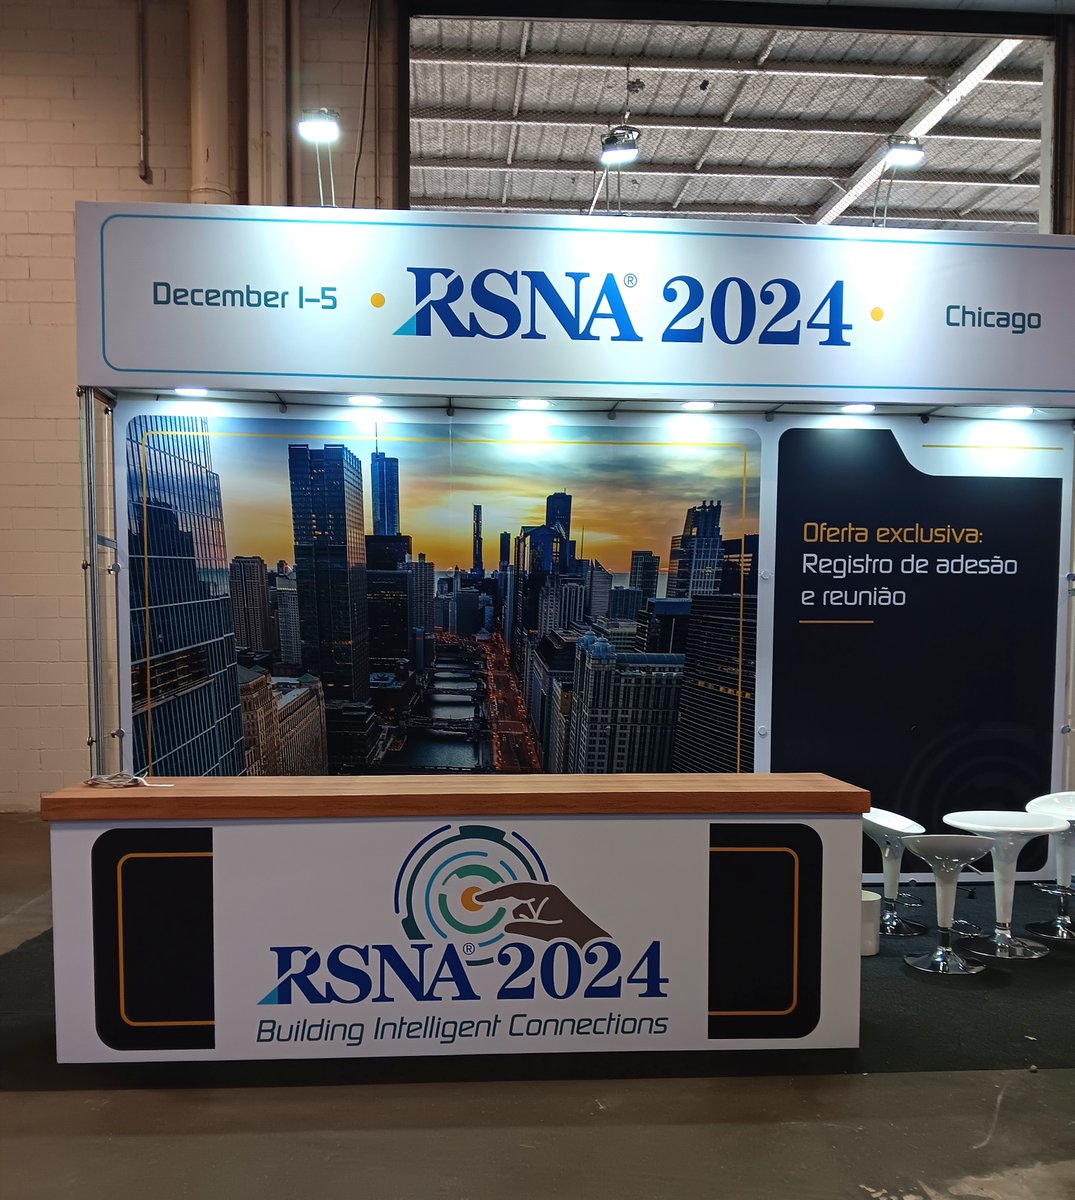 #RT RSNA: Are you attending JPR? Stop by the RSNA booth to get a special offer for #RSNA24 and learn about the new RSNA membership packages and discounts! We will be there to answer all of your questions #JPR2024  #Radiology